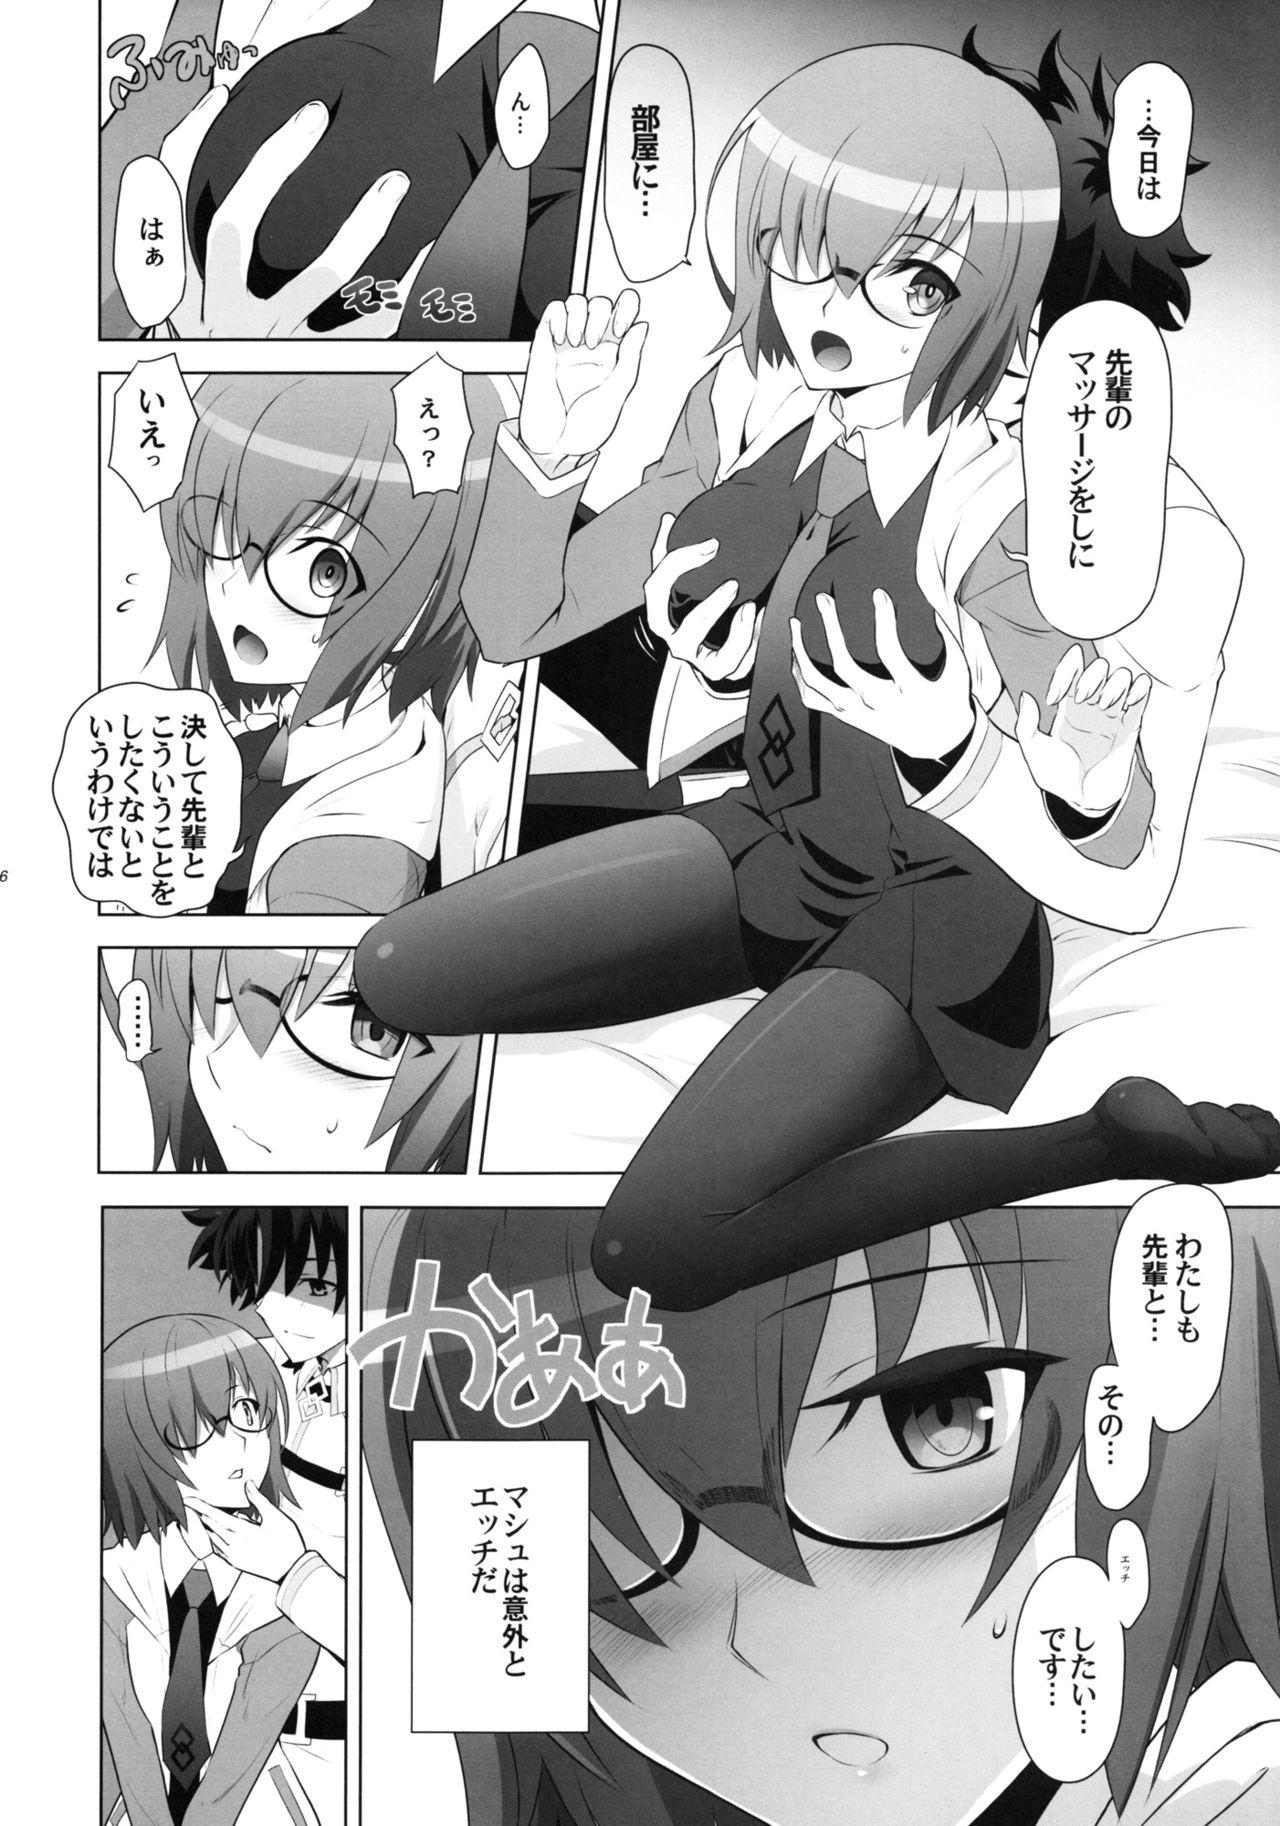 Tight T*MOON COMPLEX GO 06 - Fate grand order Love Making - Page 5